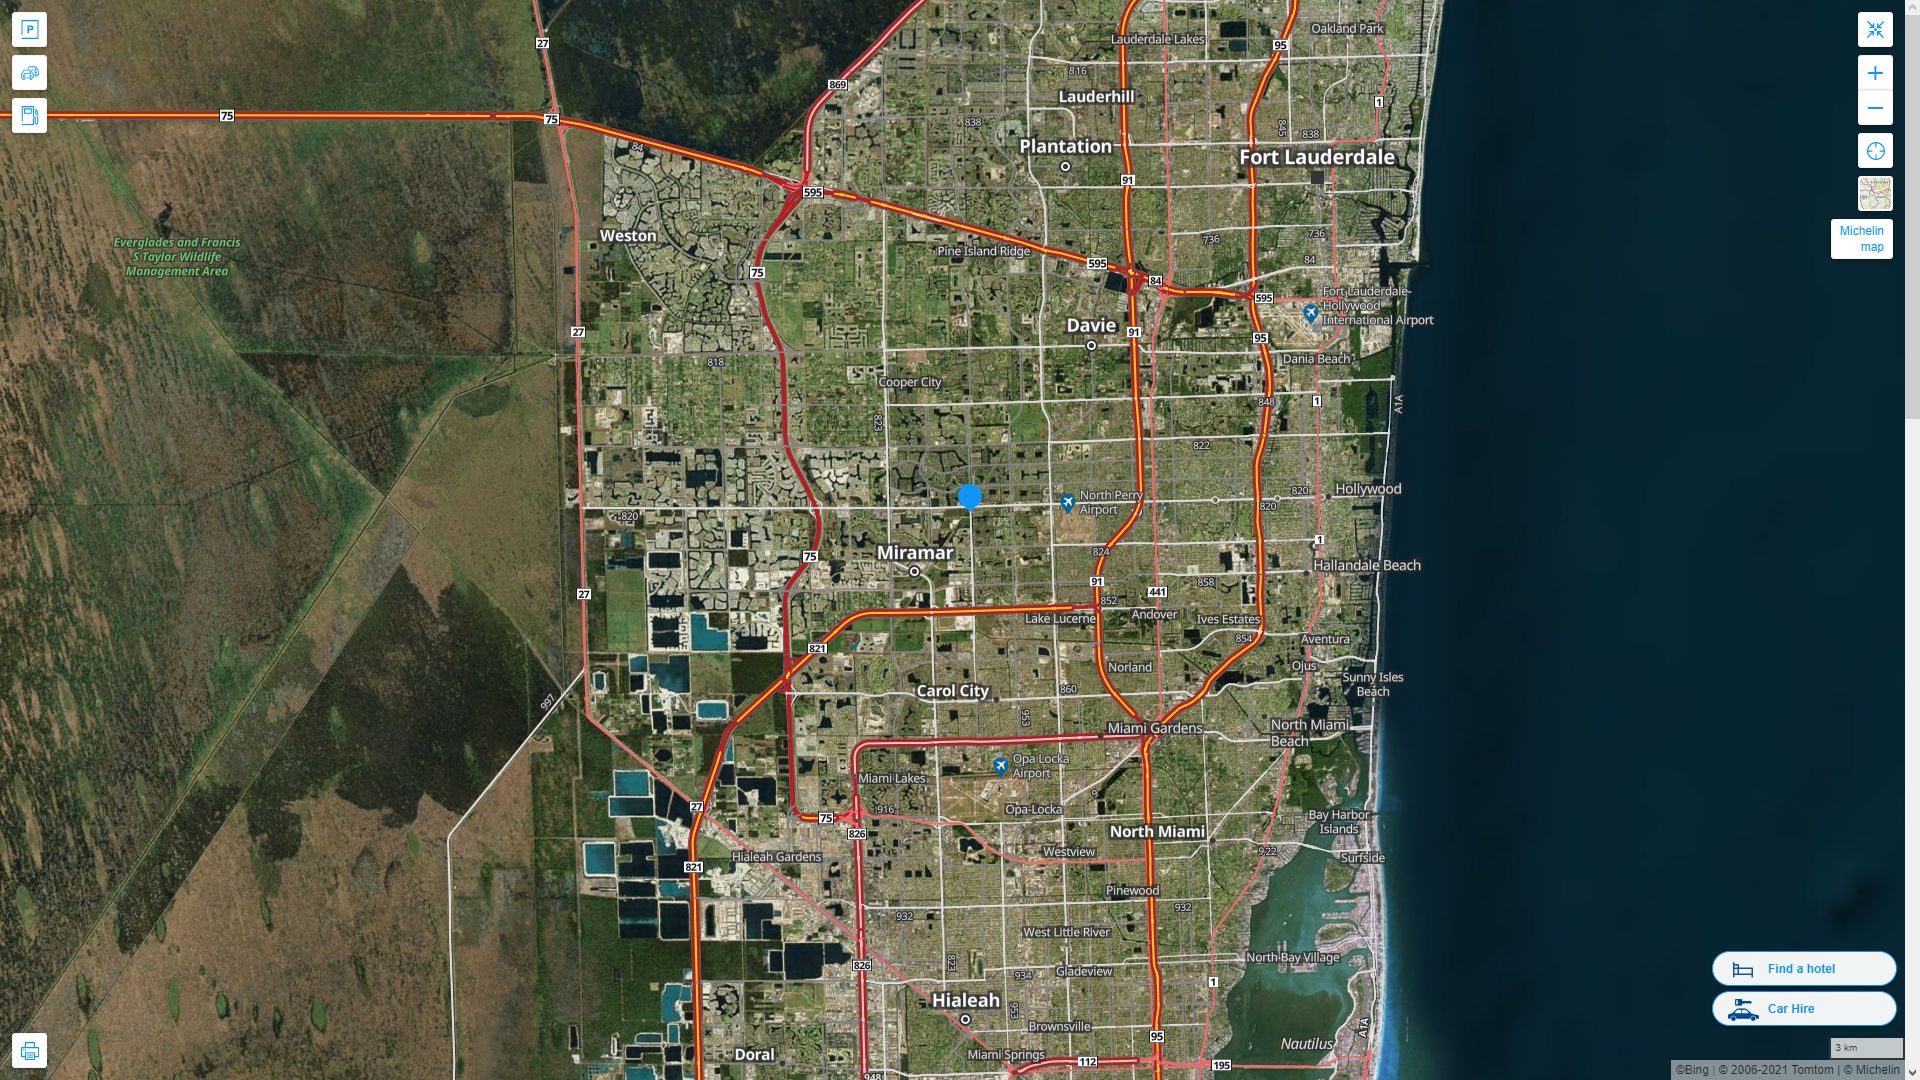 Pembroke Pines Florida Highway and Road Map with Satellite View